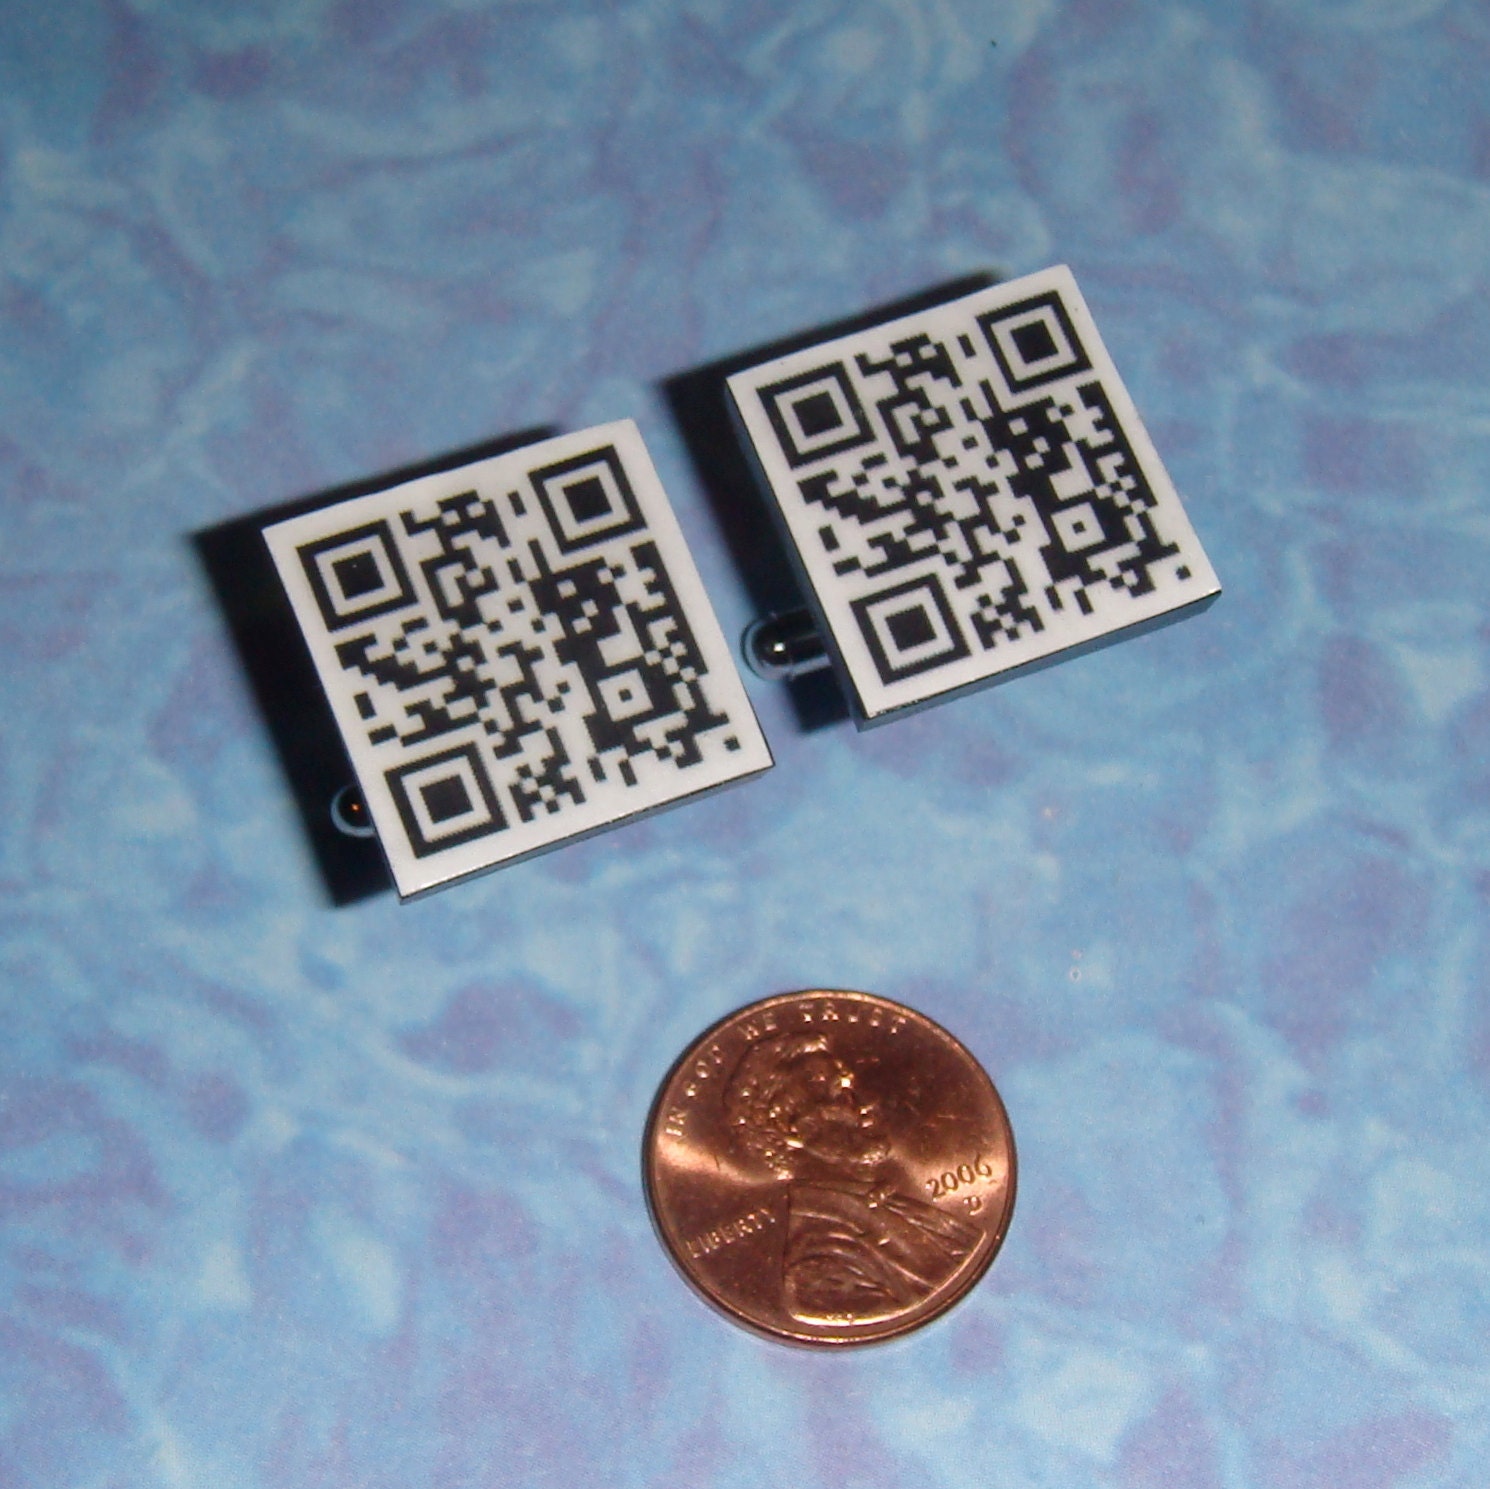 CUFFLINKS Custom QR code cuff links - choose your own message to be made as a scannable QR code